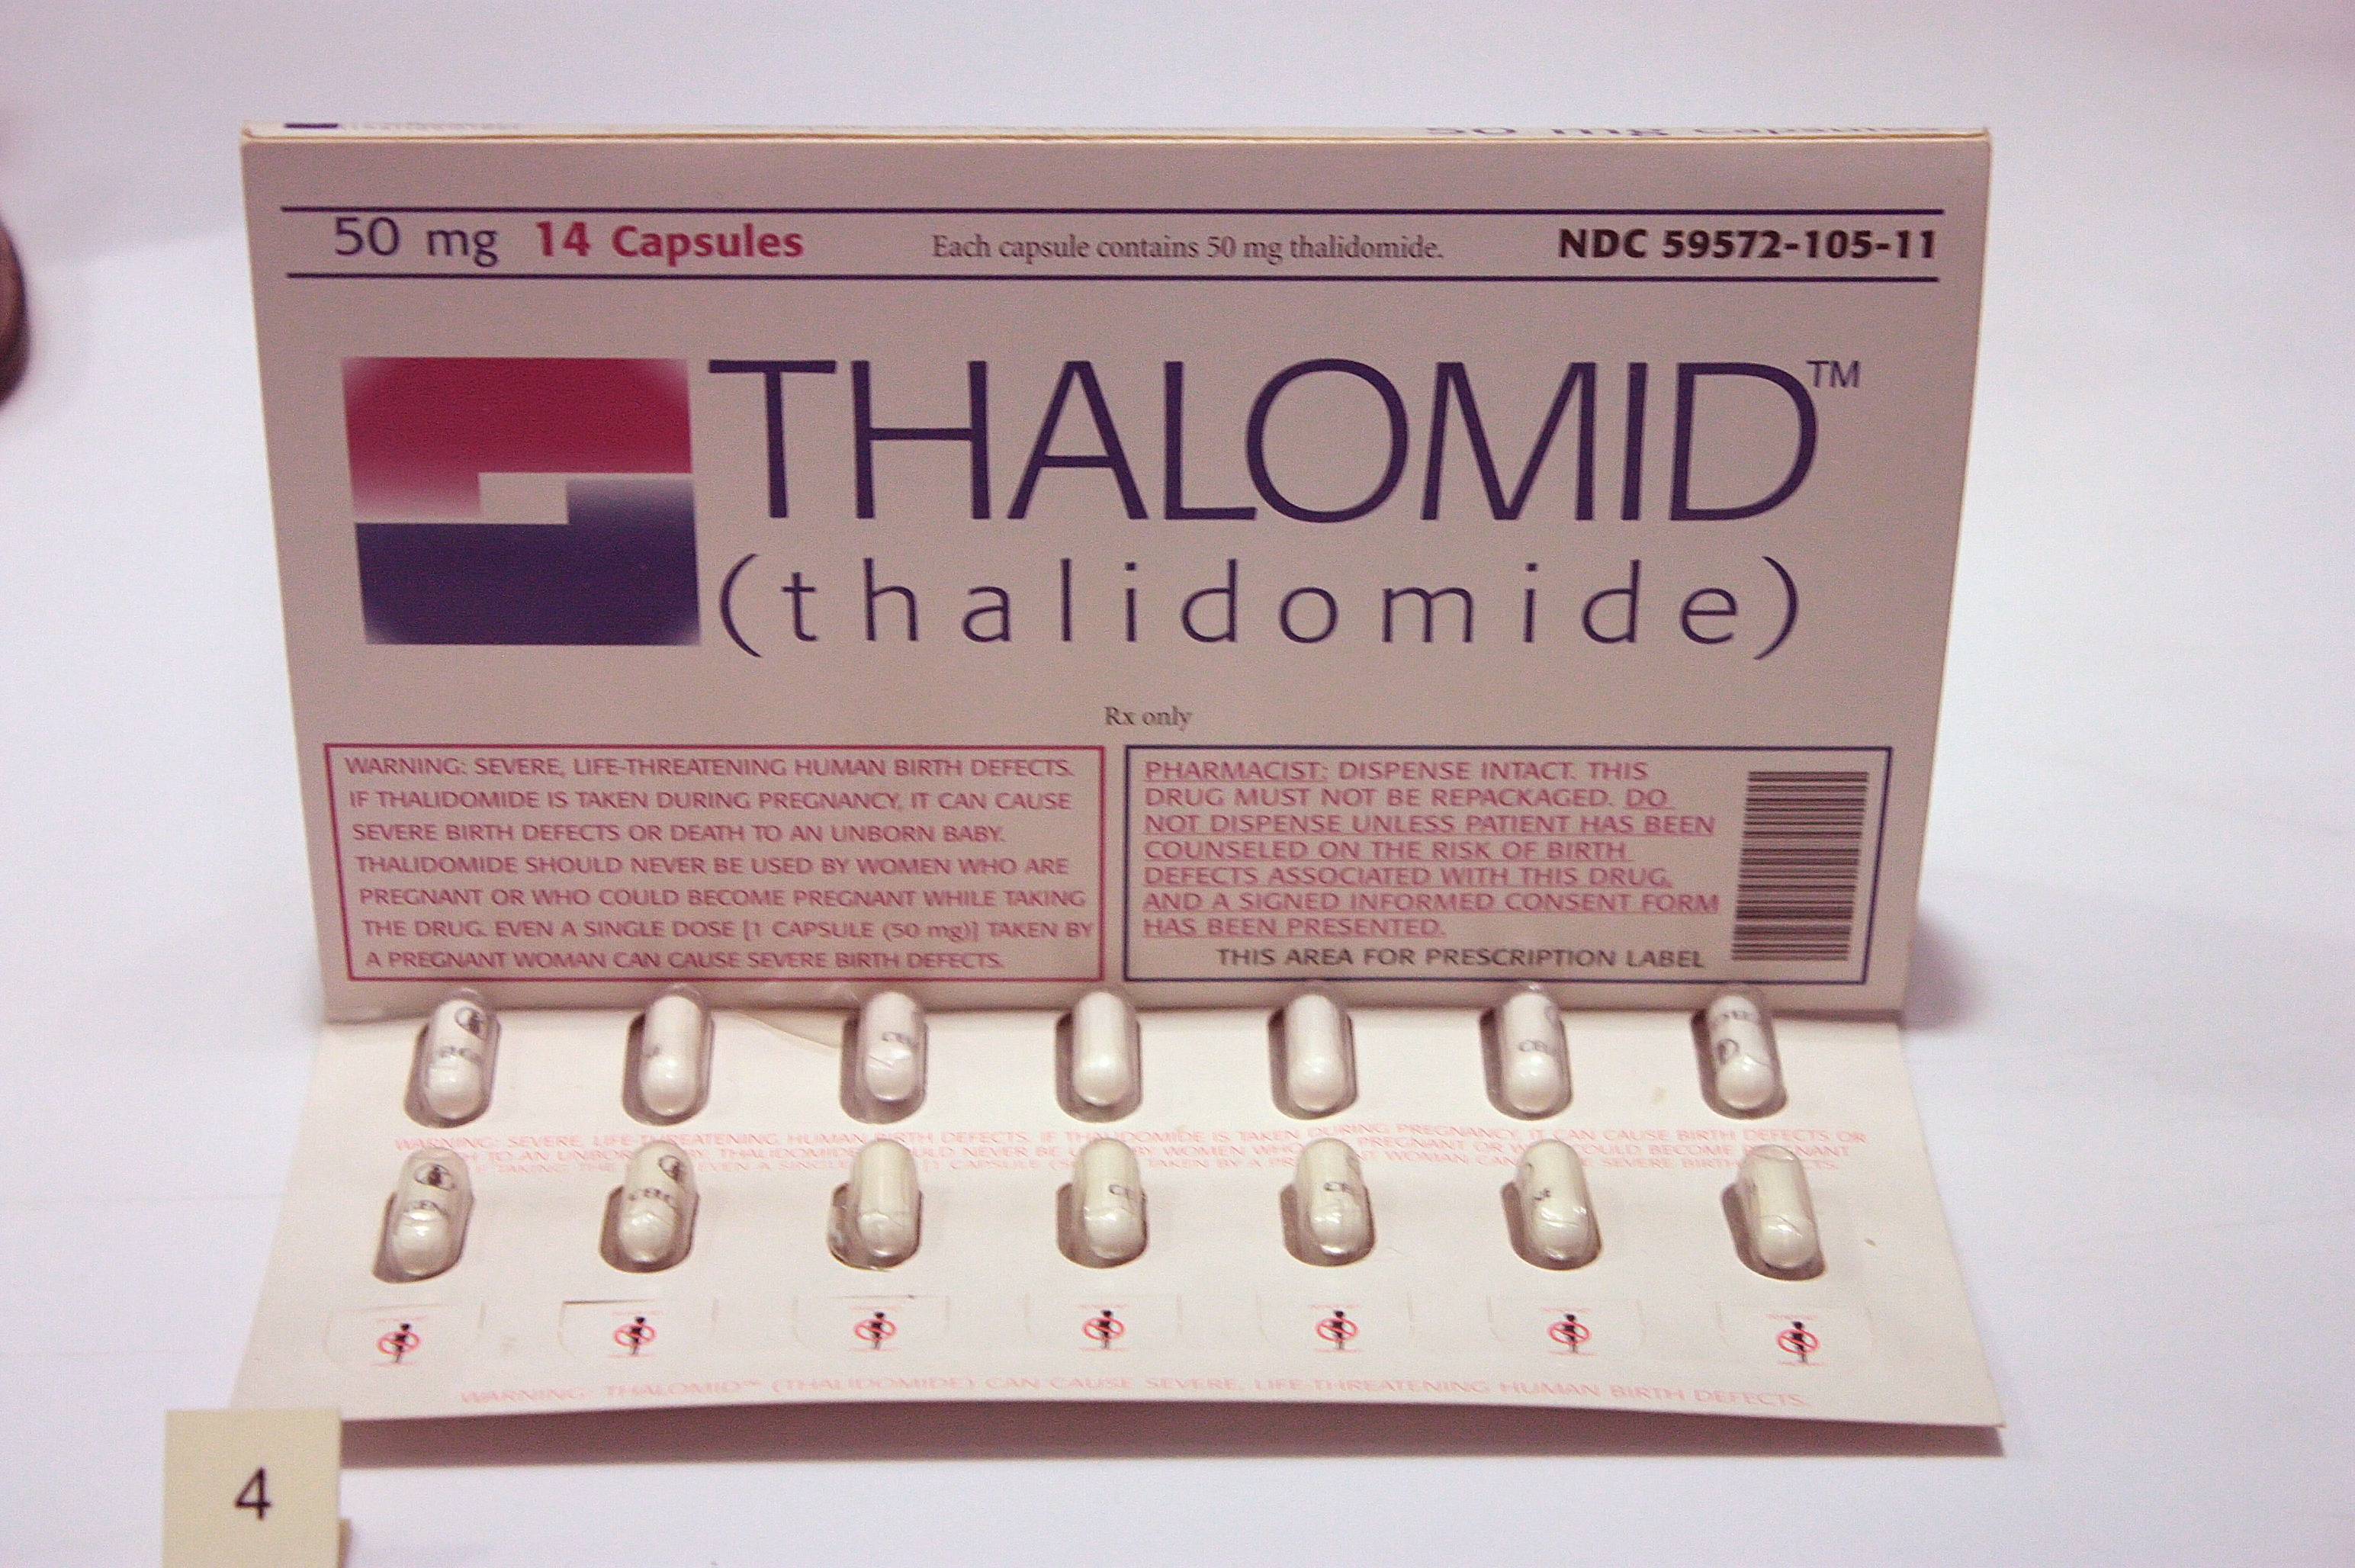 Pack of Thalidomide tablets